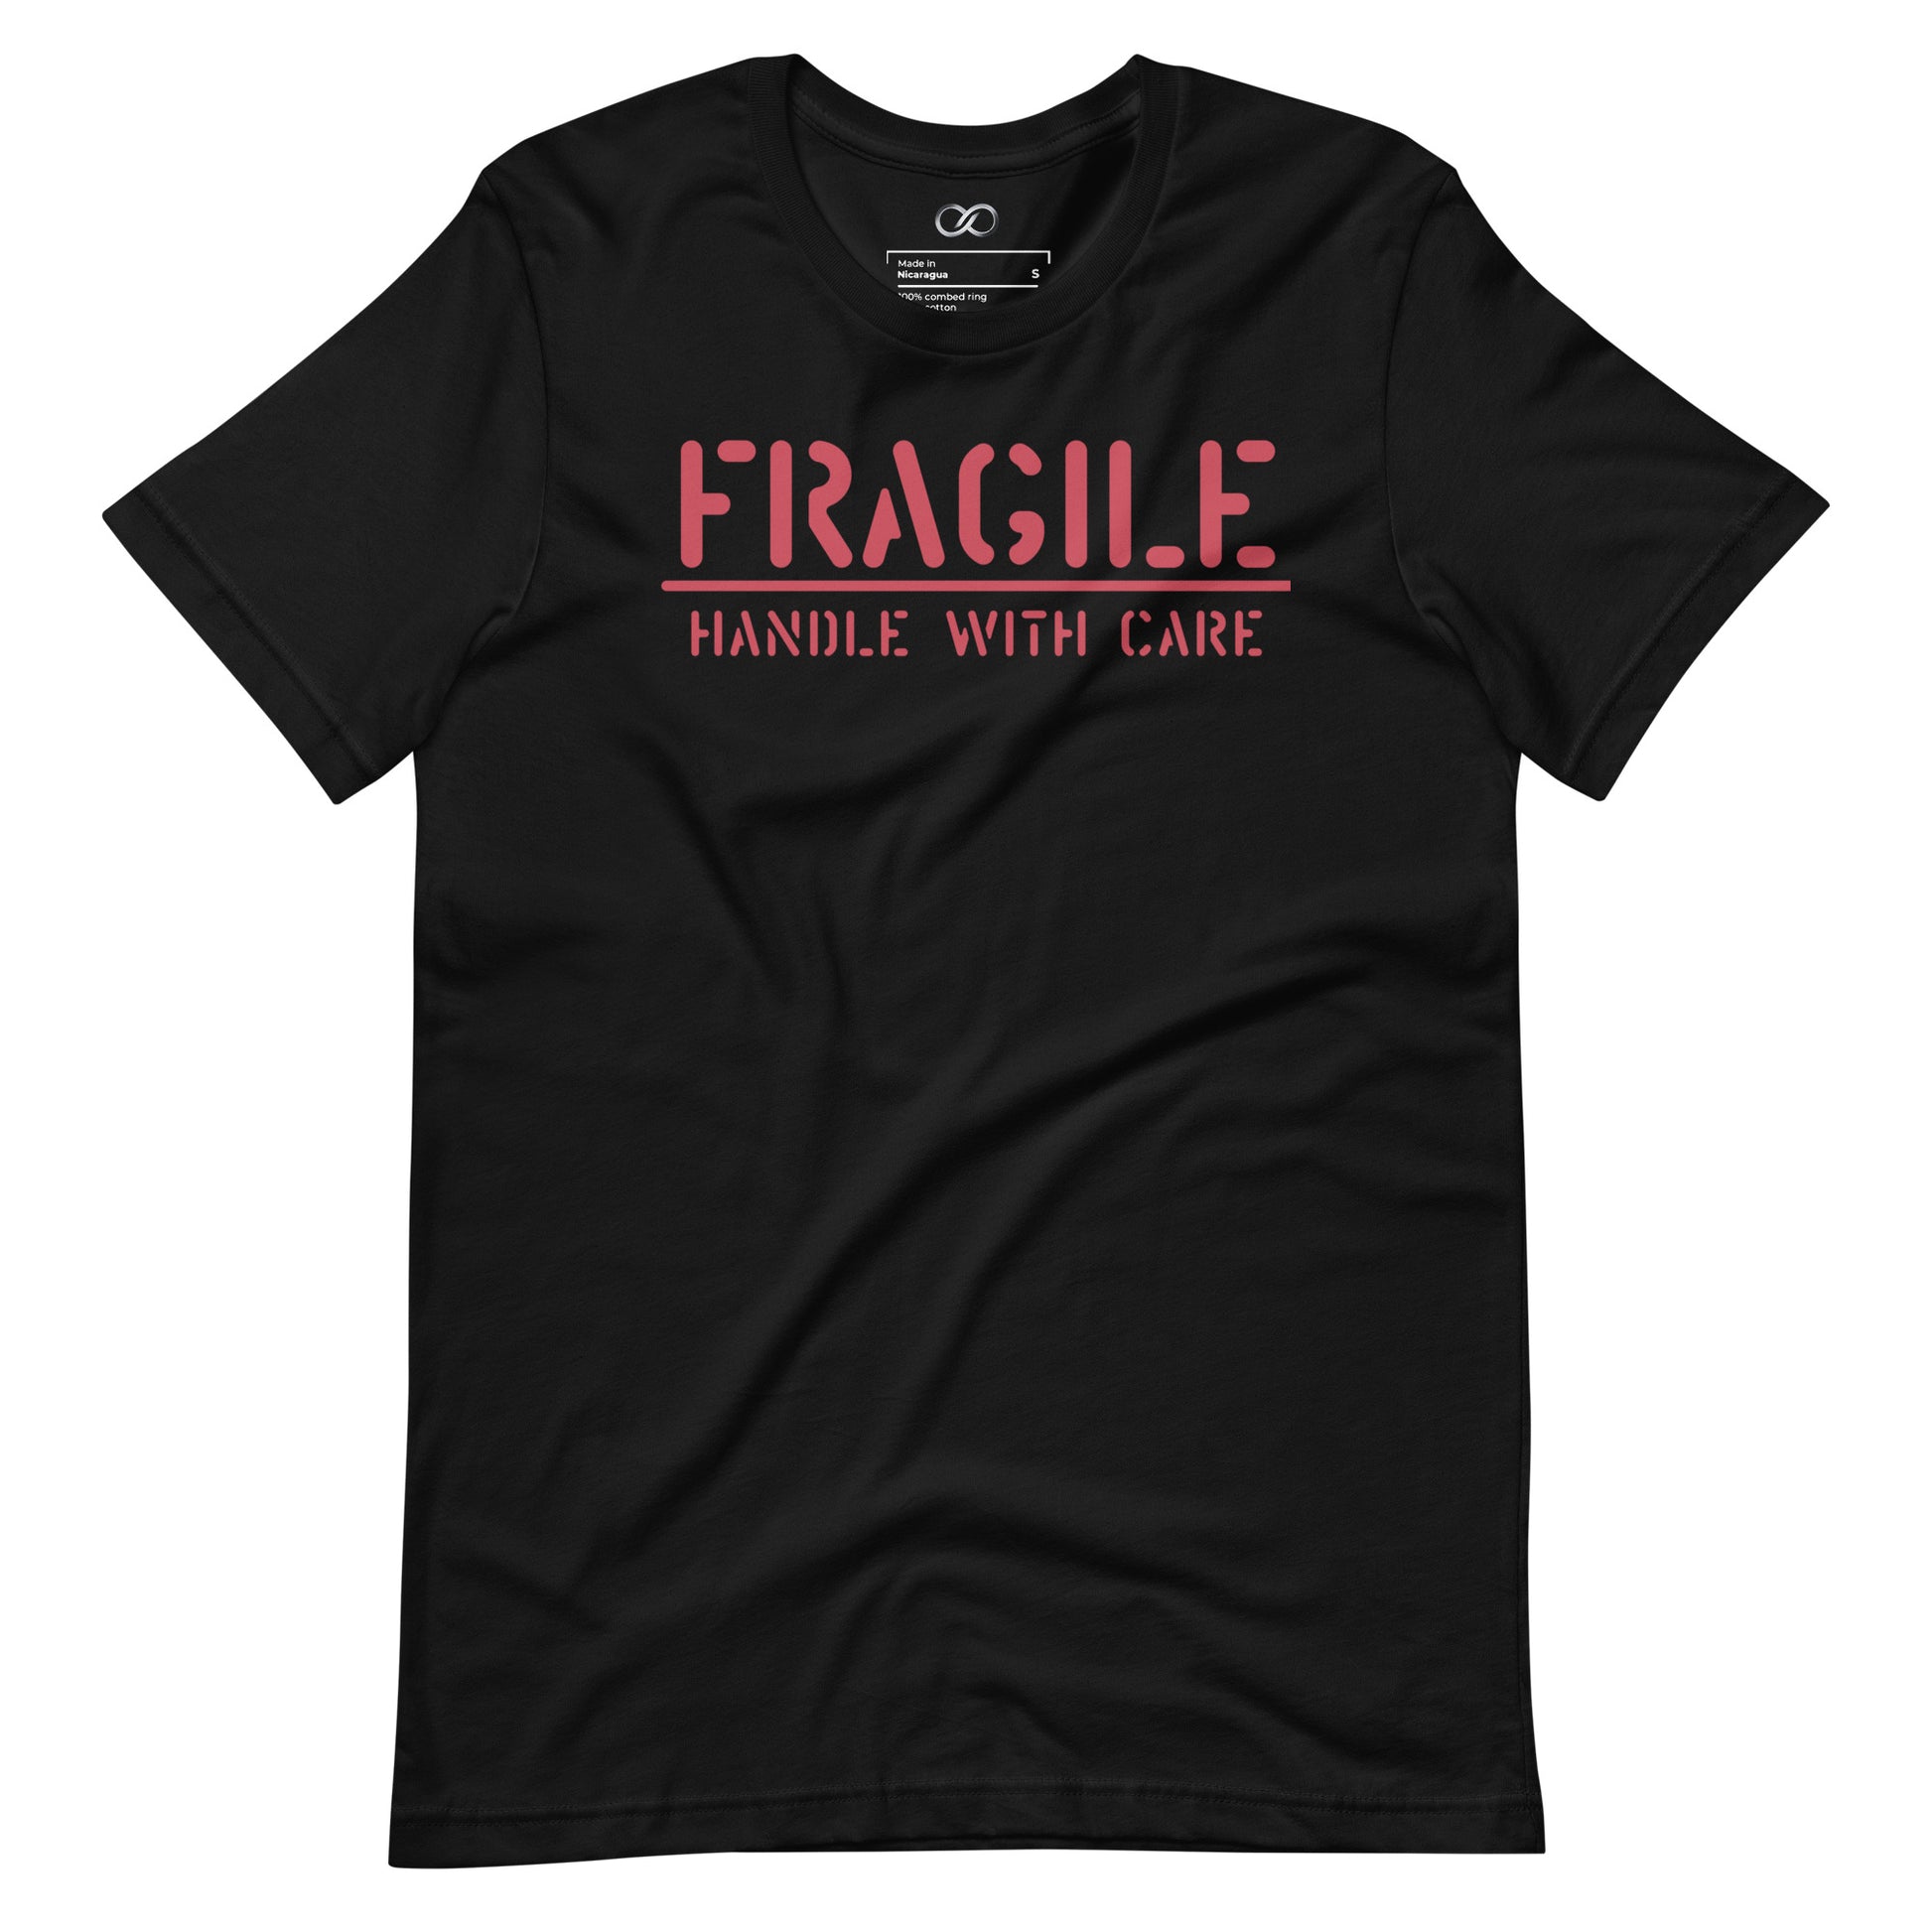 Black round neck t-shirt with the words 'FRAGILE: Handle With Care' in bold red lettering, signaling a light-hearted caution.